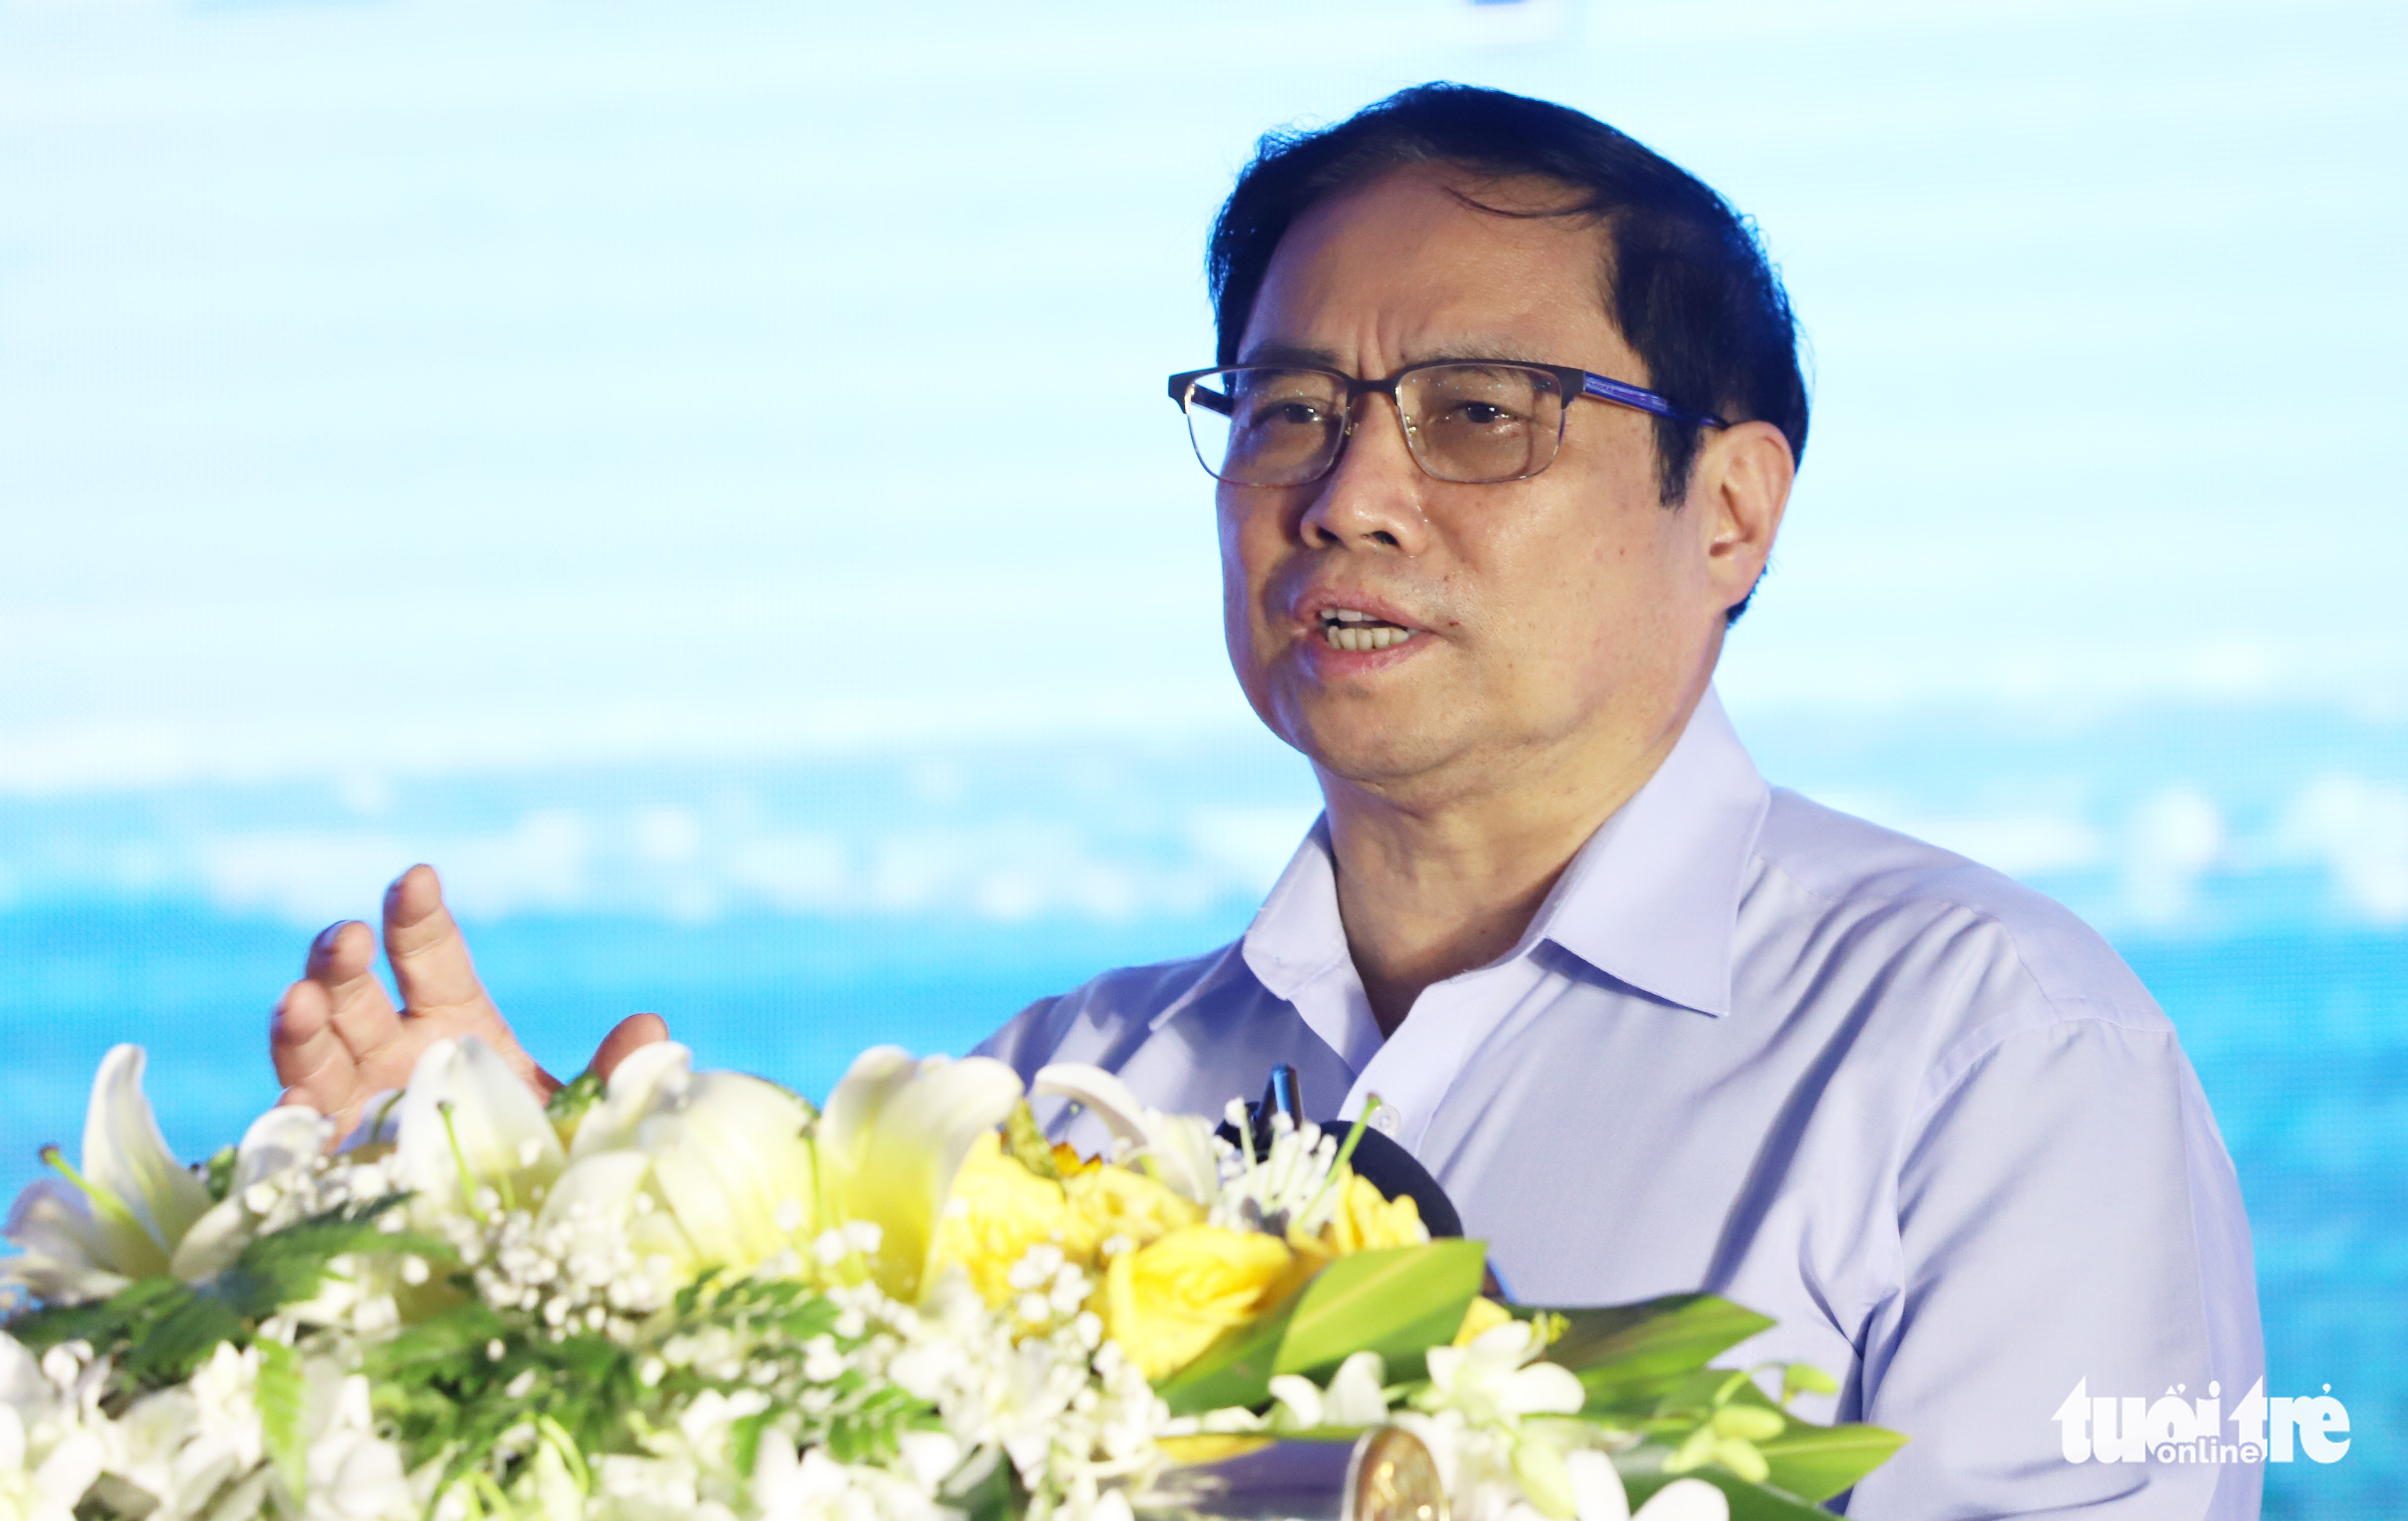 Vietnamese Prime Minister Pham Minh Chinh speaks at the inauguration of the Cai Lon-Cai Be irrigation system in Kien Giang Province, March 5, 2022. Photo: Chi Quoc / Tuoi Tre